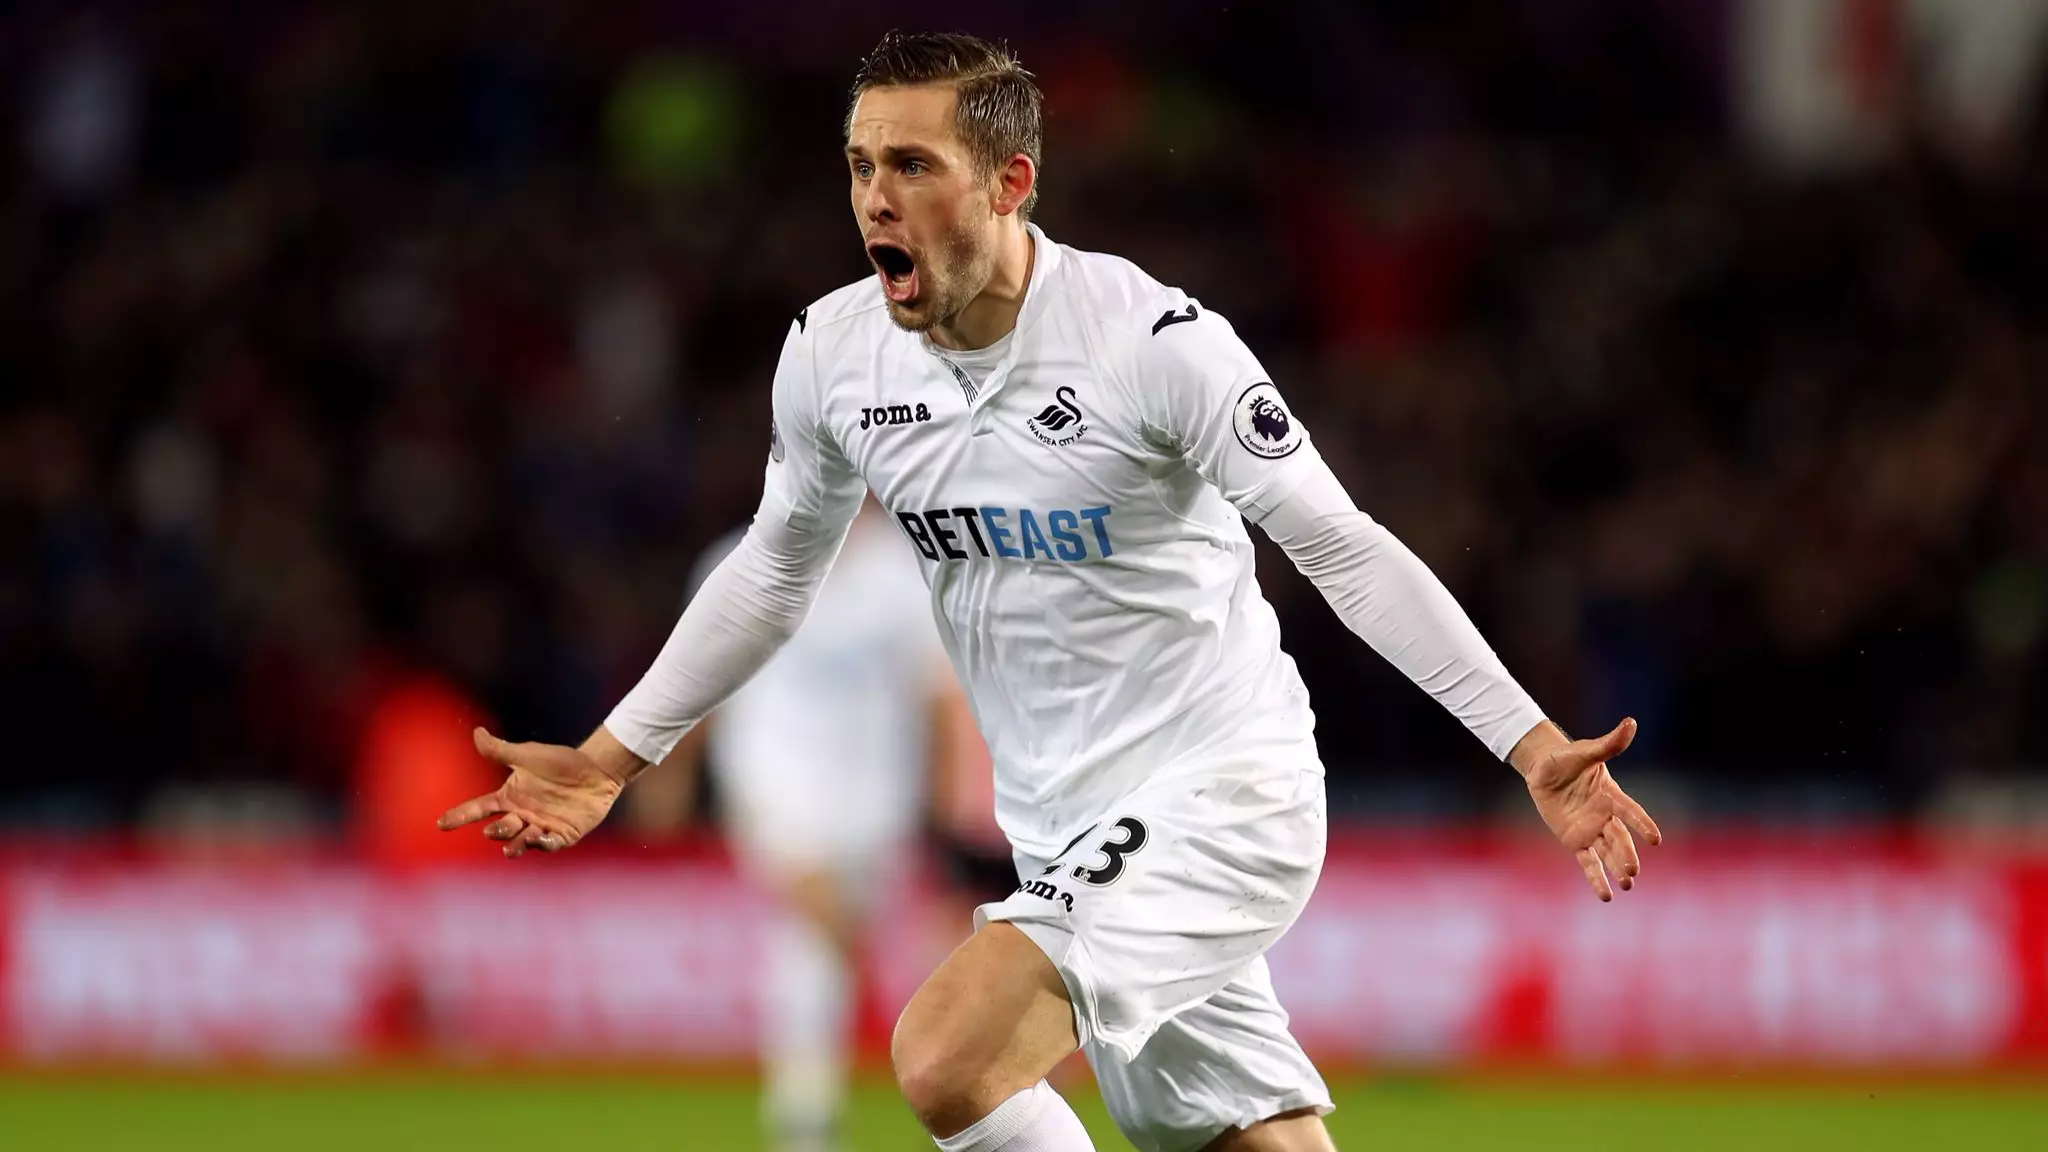 Swansea Reject Massive Bid For Gylfi Sigurdsson From Leicester City